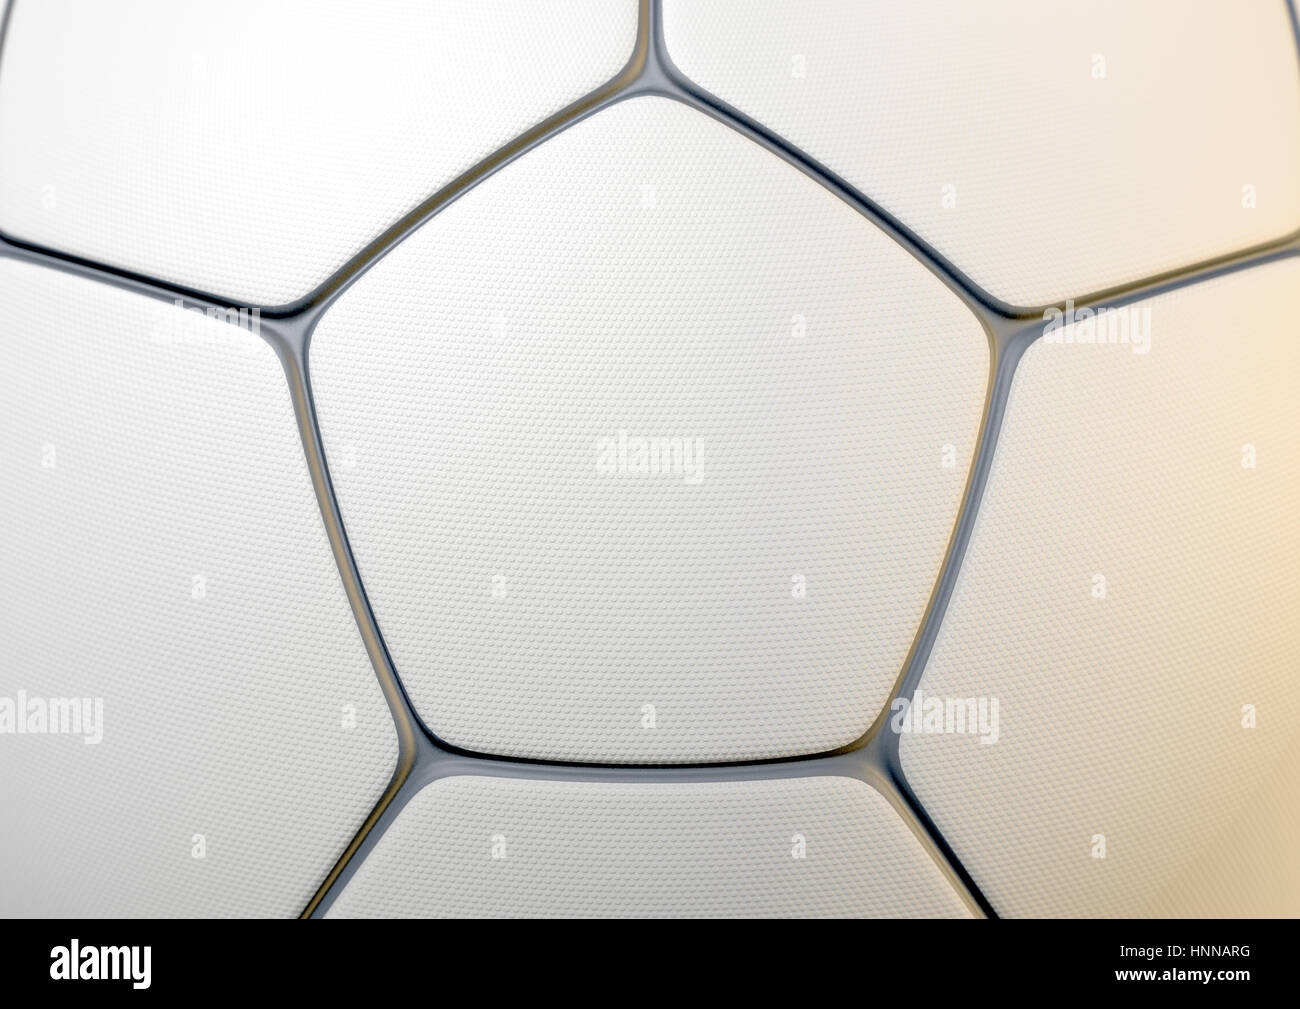 A closeup concept of a white synthetic soccer ball in a traditional shape with a dimple textured surface and dark grey inlays - 3D render Stock Photo